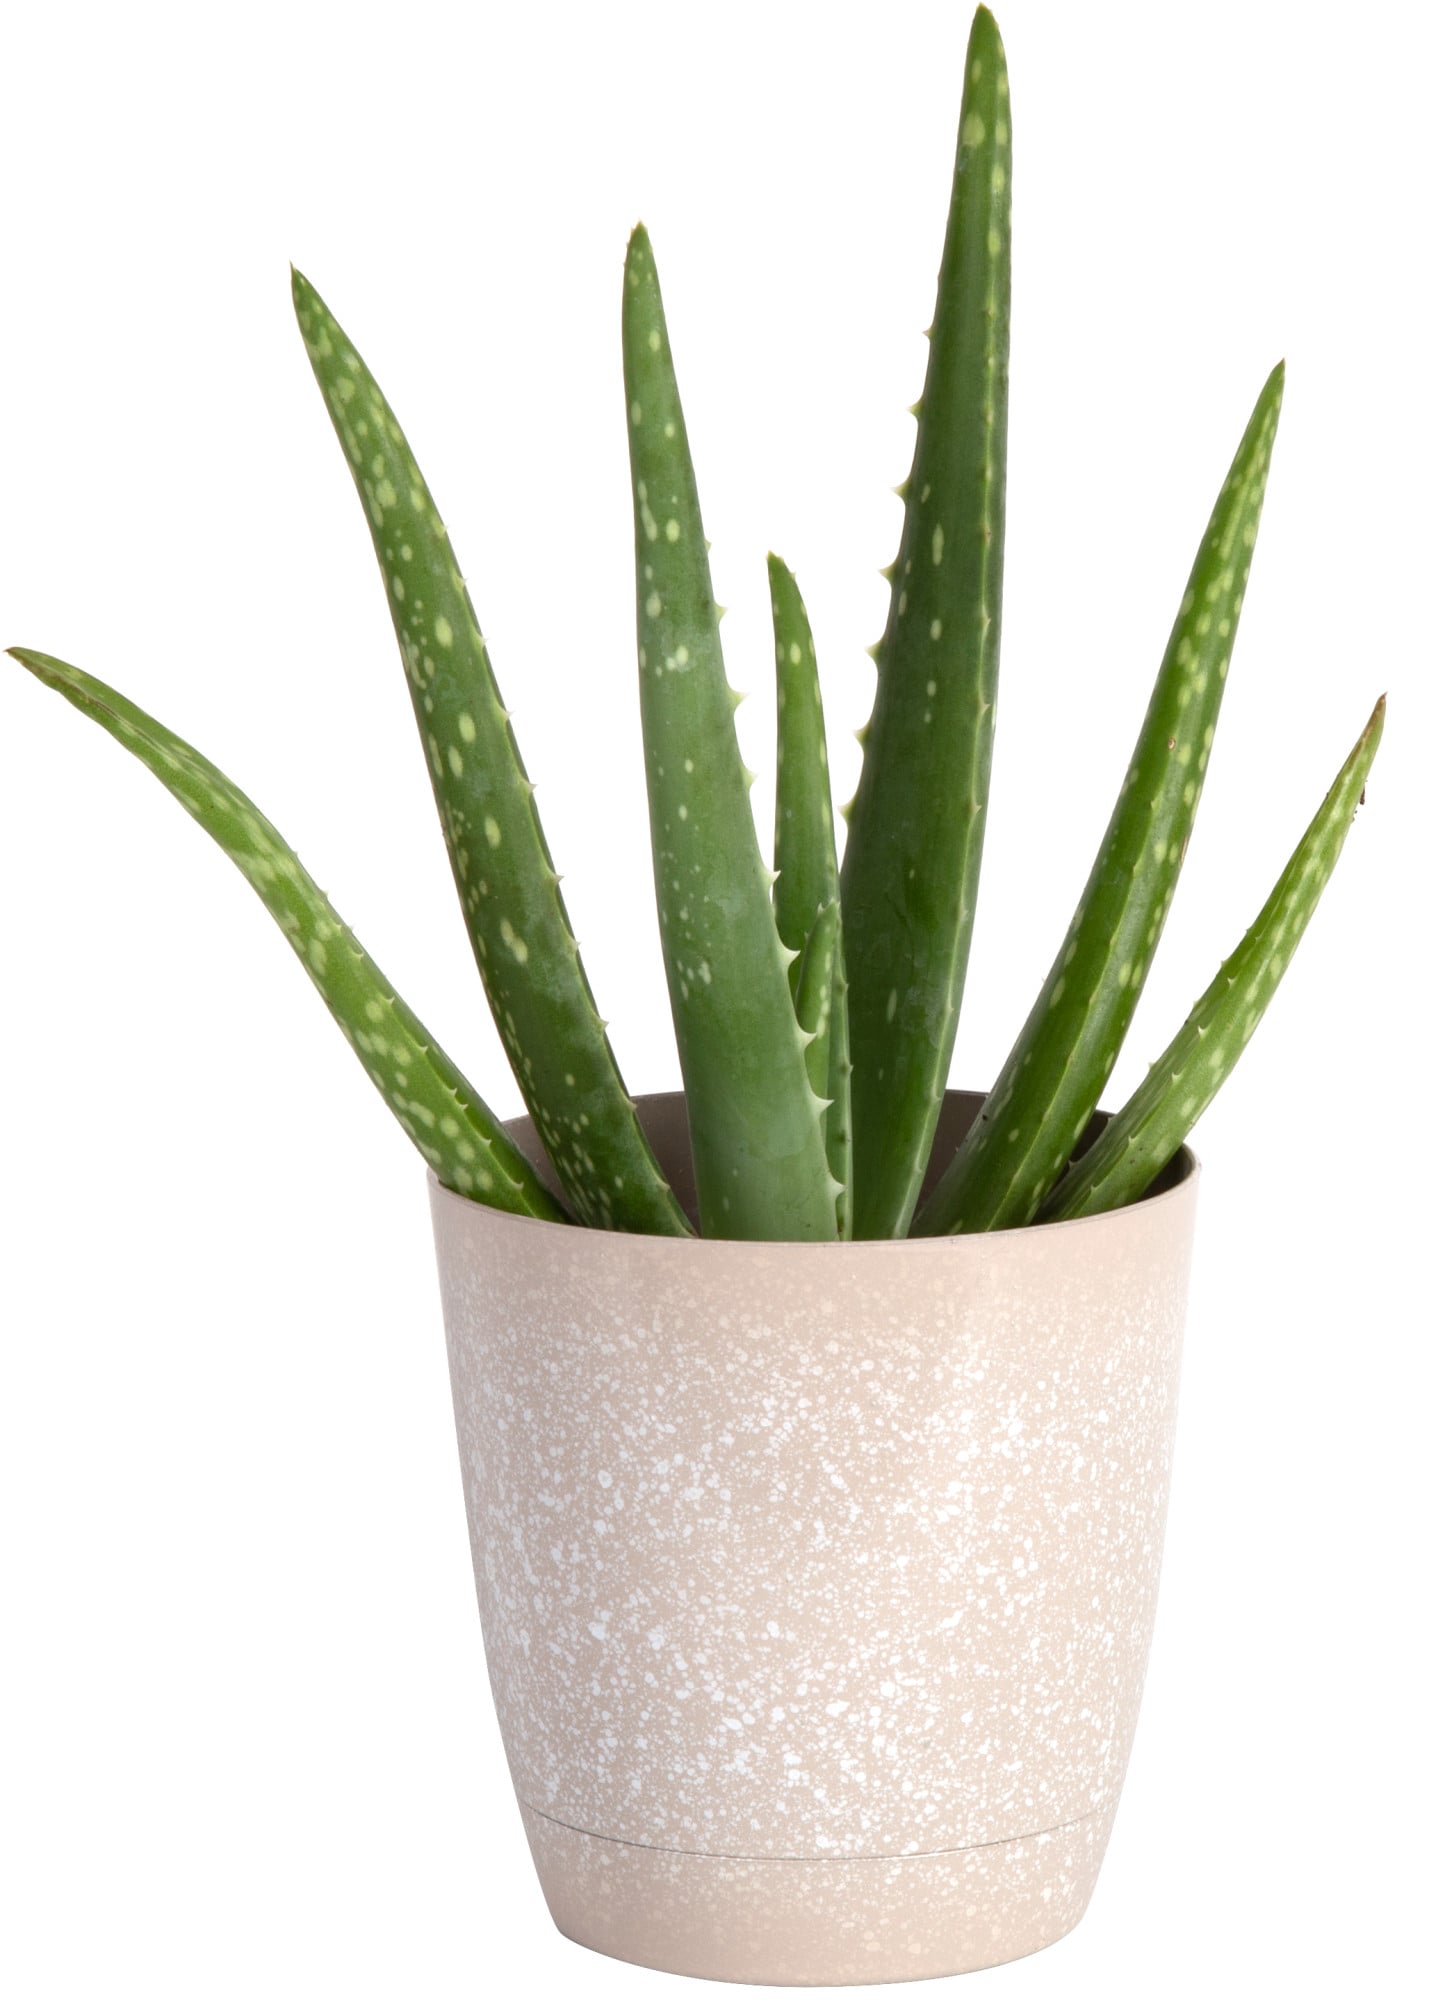 12 to 14-Inches Tall Costa Farms Aloe Vera Live Indoor Plant Fresh From Our Farm 2-Pack Ships in Grow Pot 